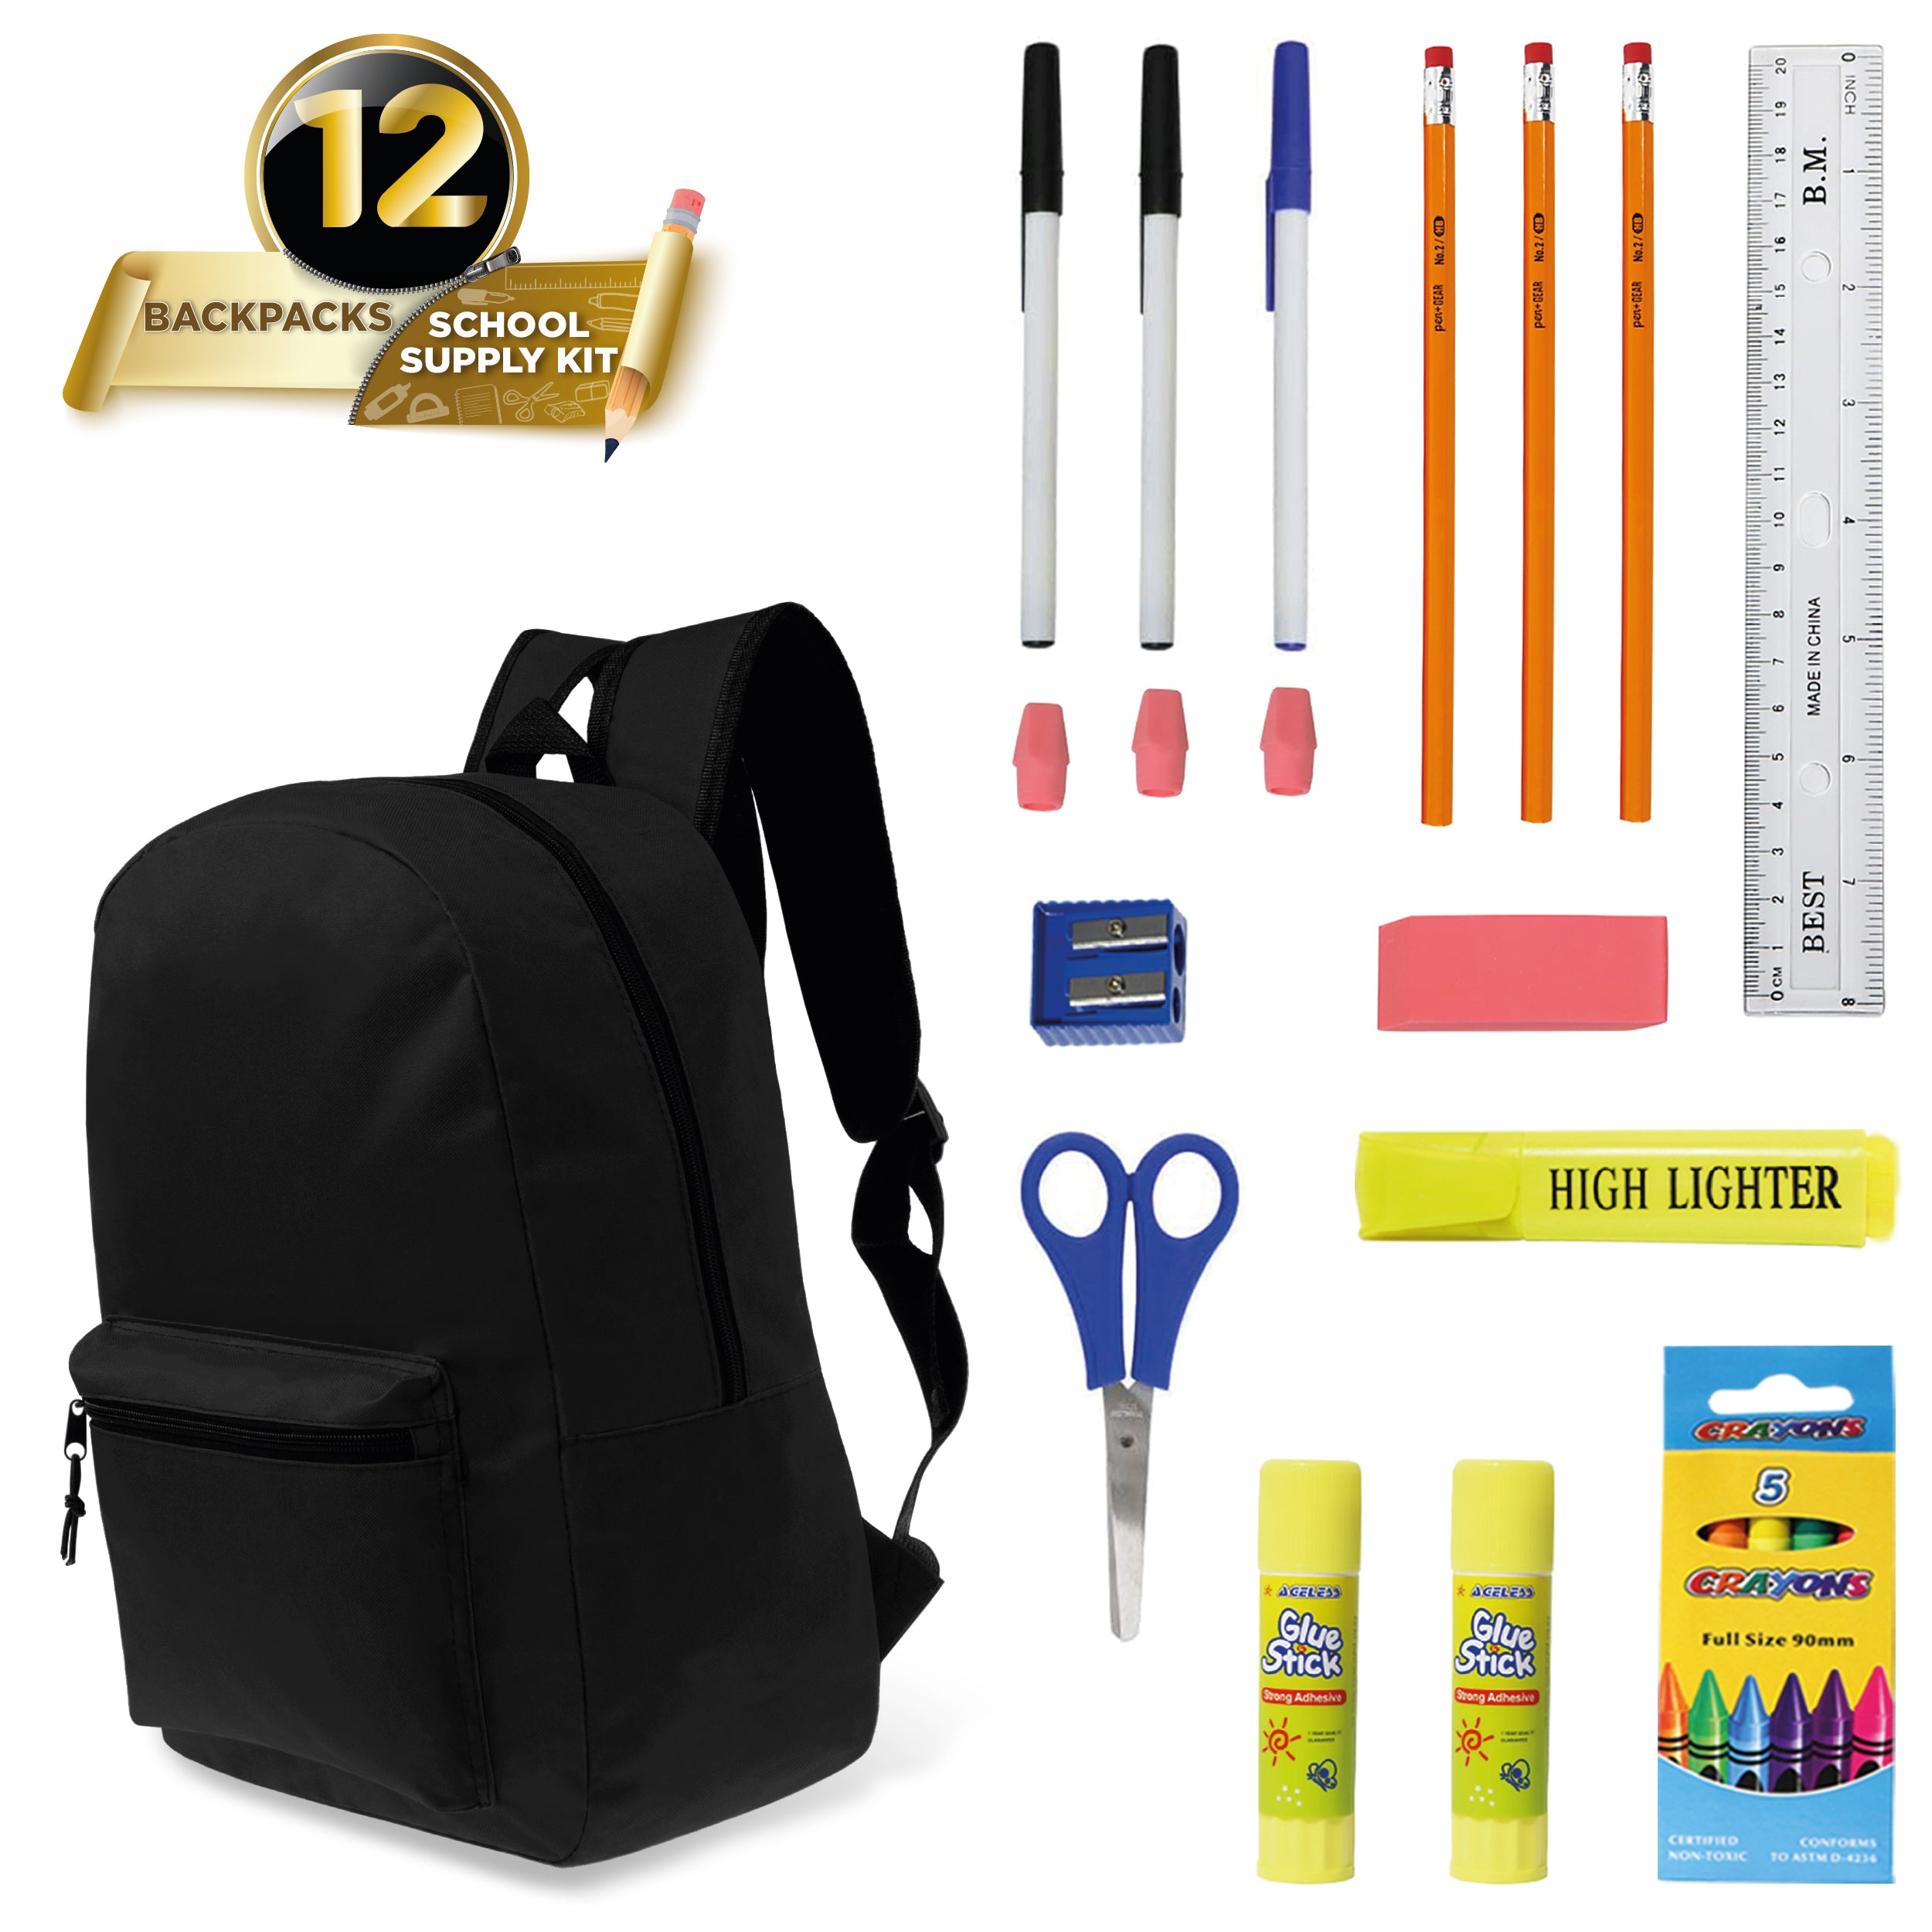 17 inches School Backpacks for Kids In Black Color Bulk School Supplies - Kit Case Of 12